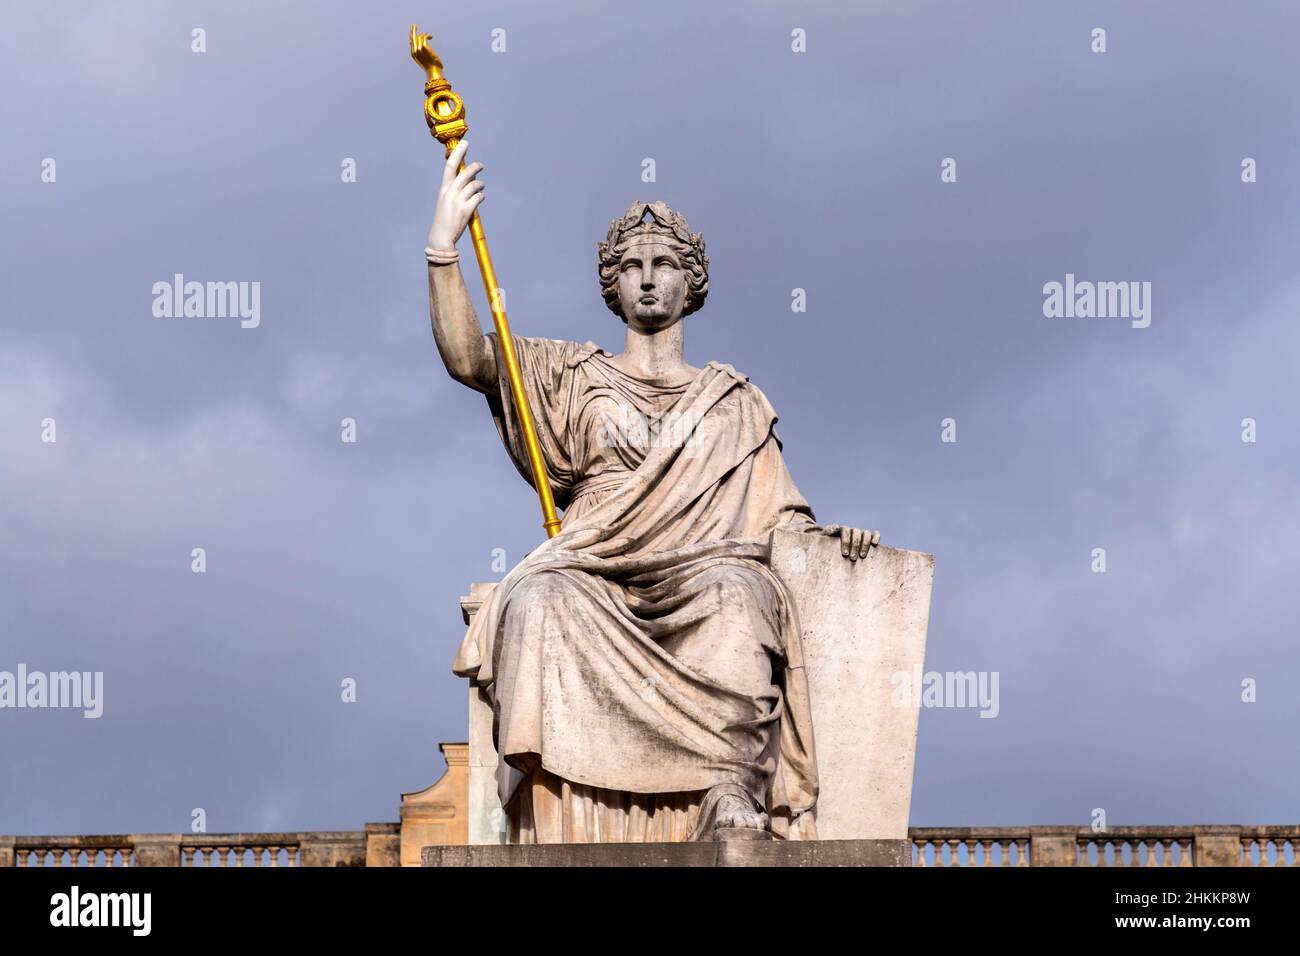 Paris, France - January 20, 2022: Detail from the monument in front of the National Assembly building in Paris, France. Stock Photo